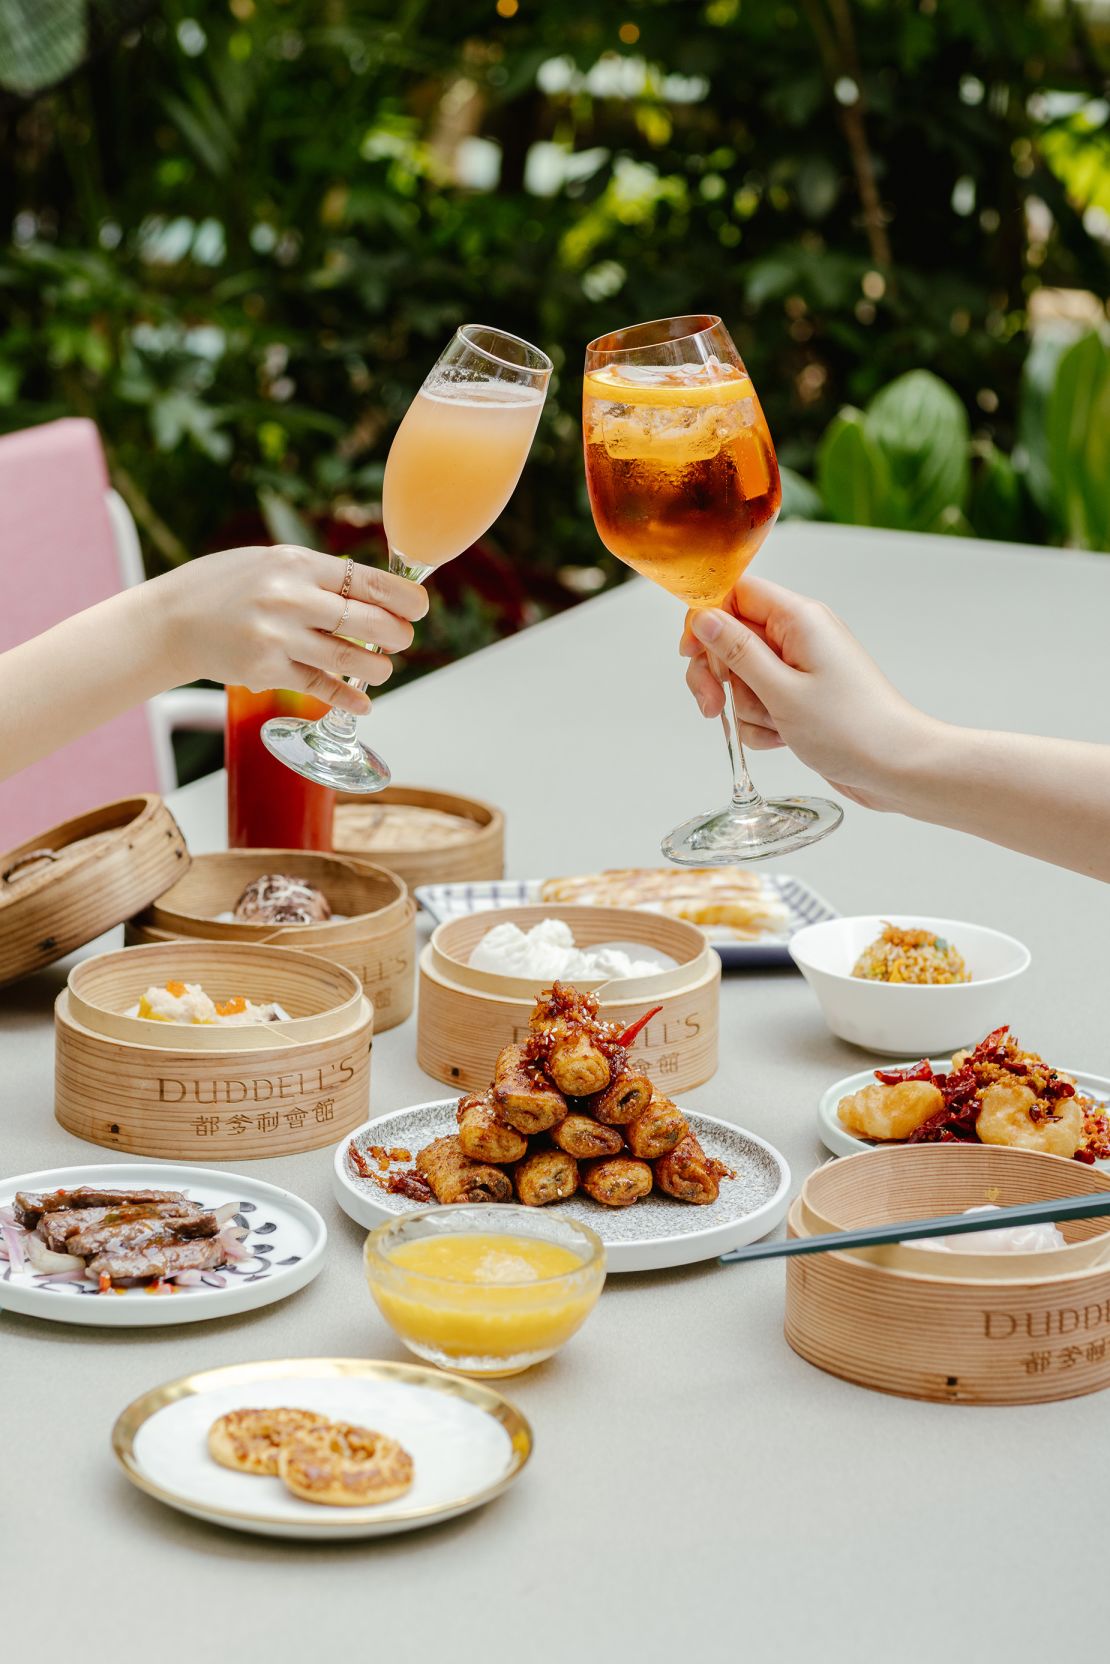 Duddell's lush terrace is the perfect spot for a Champagne dim sum brunch.